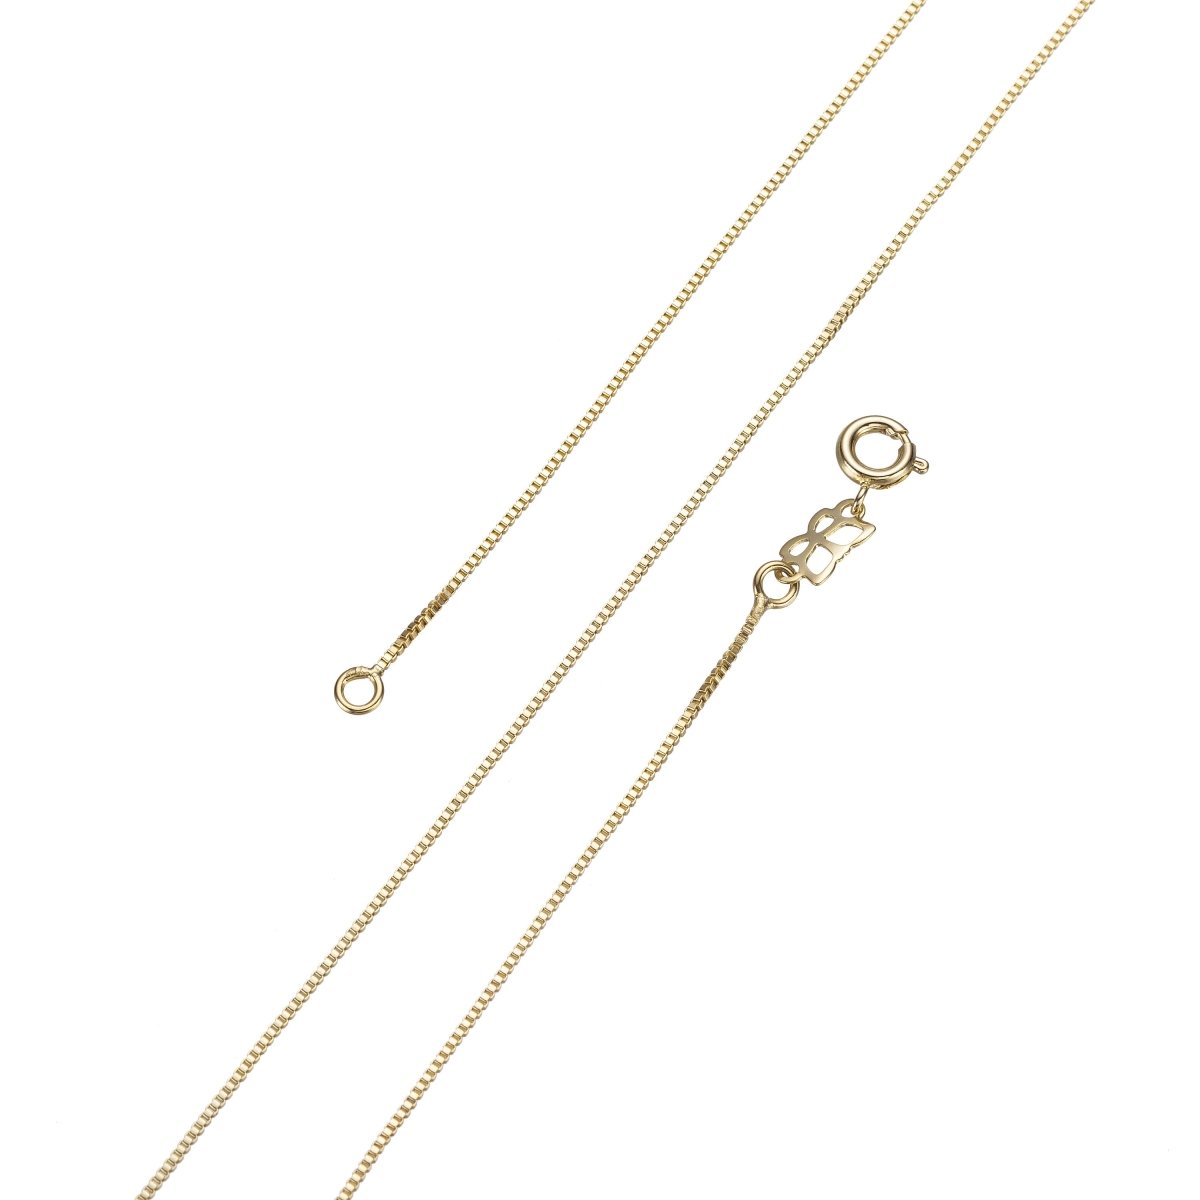 14K Gold Plated 16, 17.5" Box Necklace w/ Spring Rings, 1mm in Width | CN-241, CN-318 - DLUXCA